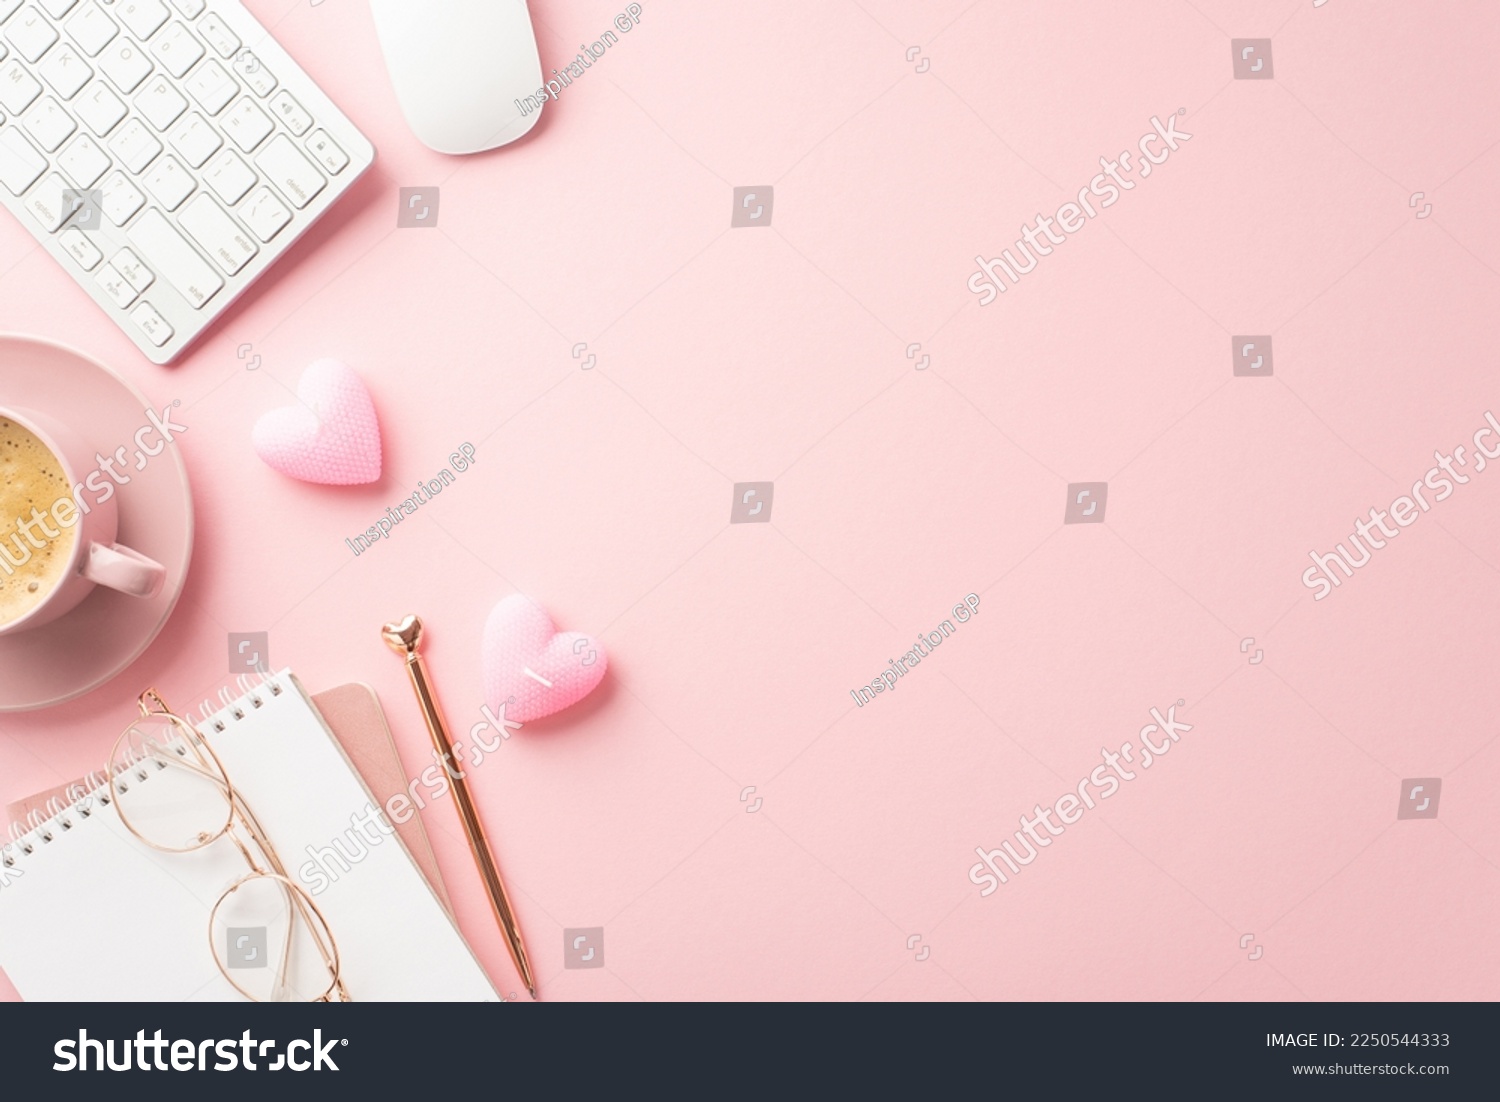 St Valentine's Day concept. Top view photo of notepad pen keyboard computer mouse glasses heart shaped candles and cup of coffee on saucer on isolated pastel pink background with copyspace #2250544333